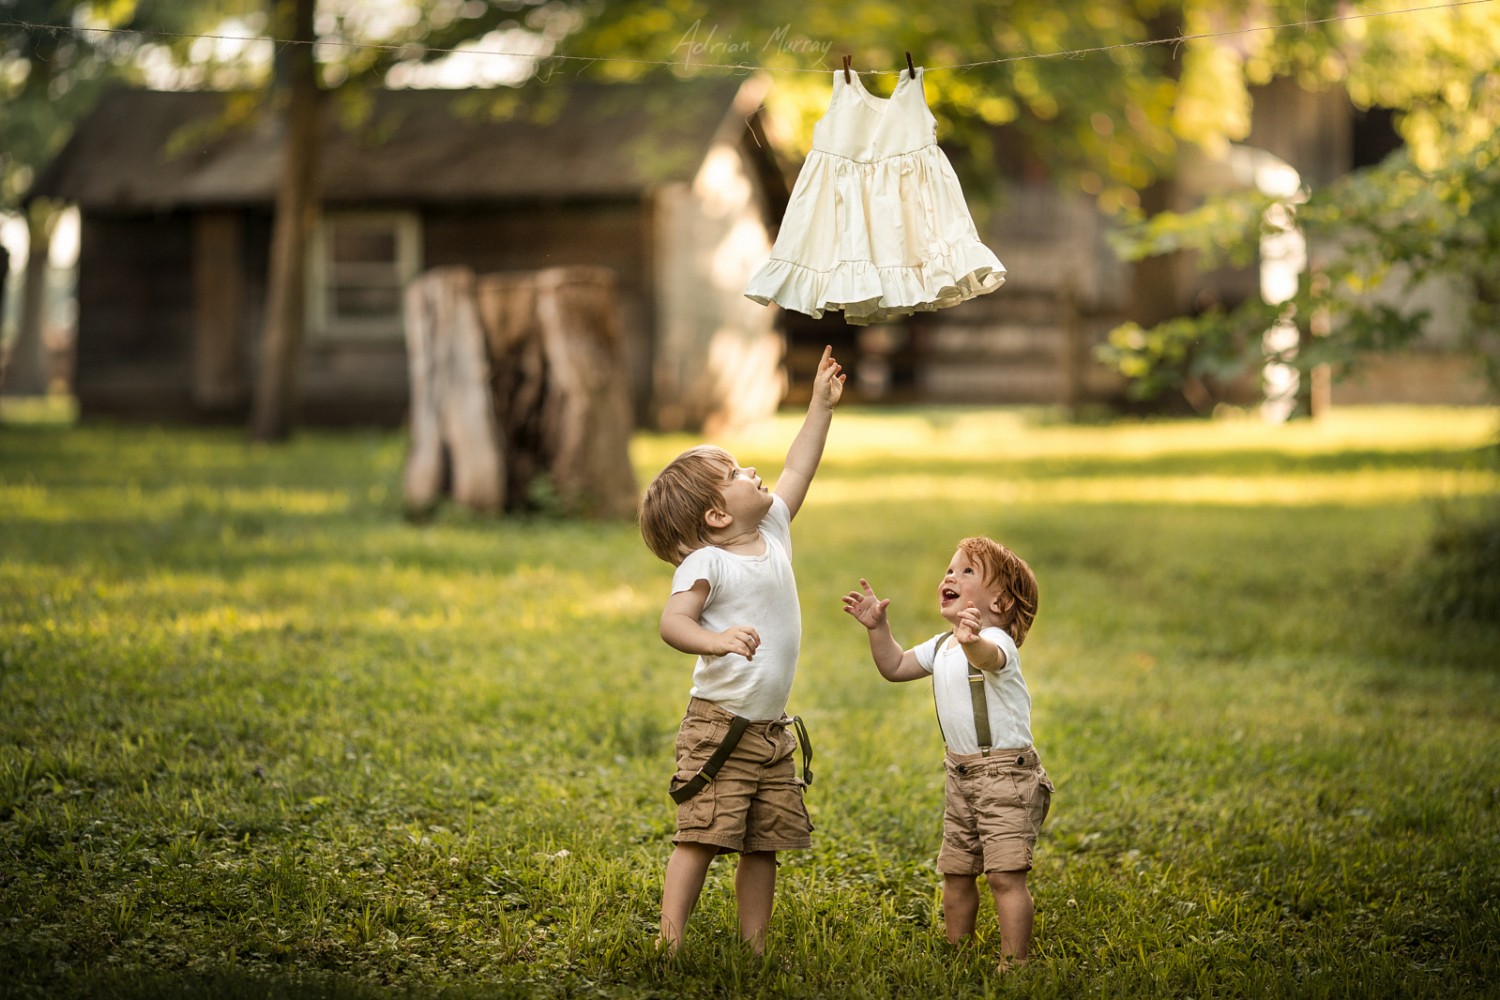 It's a Girl! Adrian Murray Posts Adorable Baby Announcement to 500px